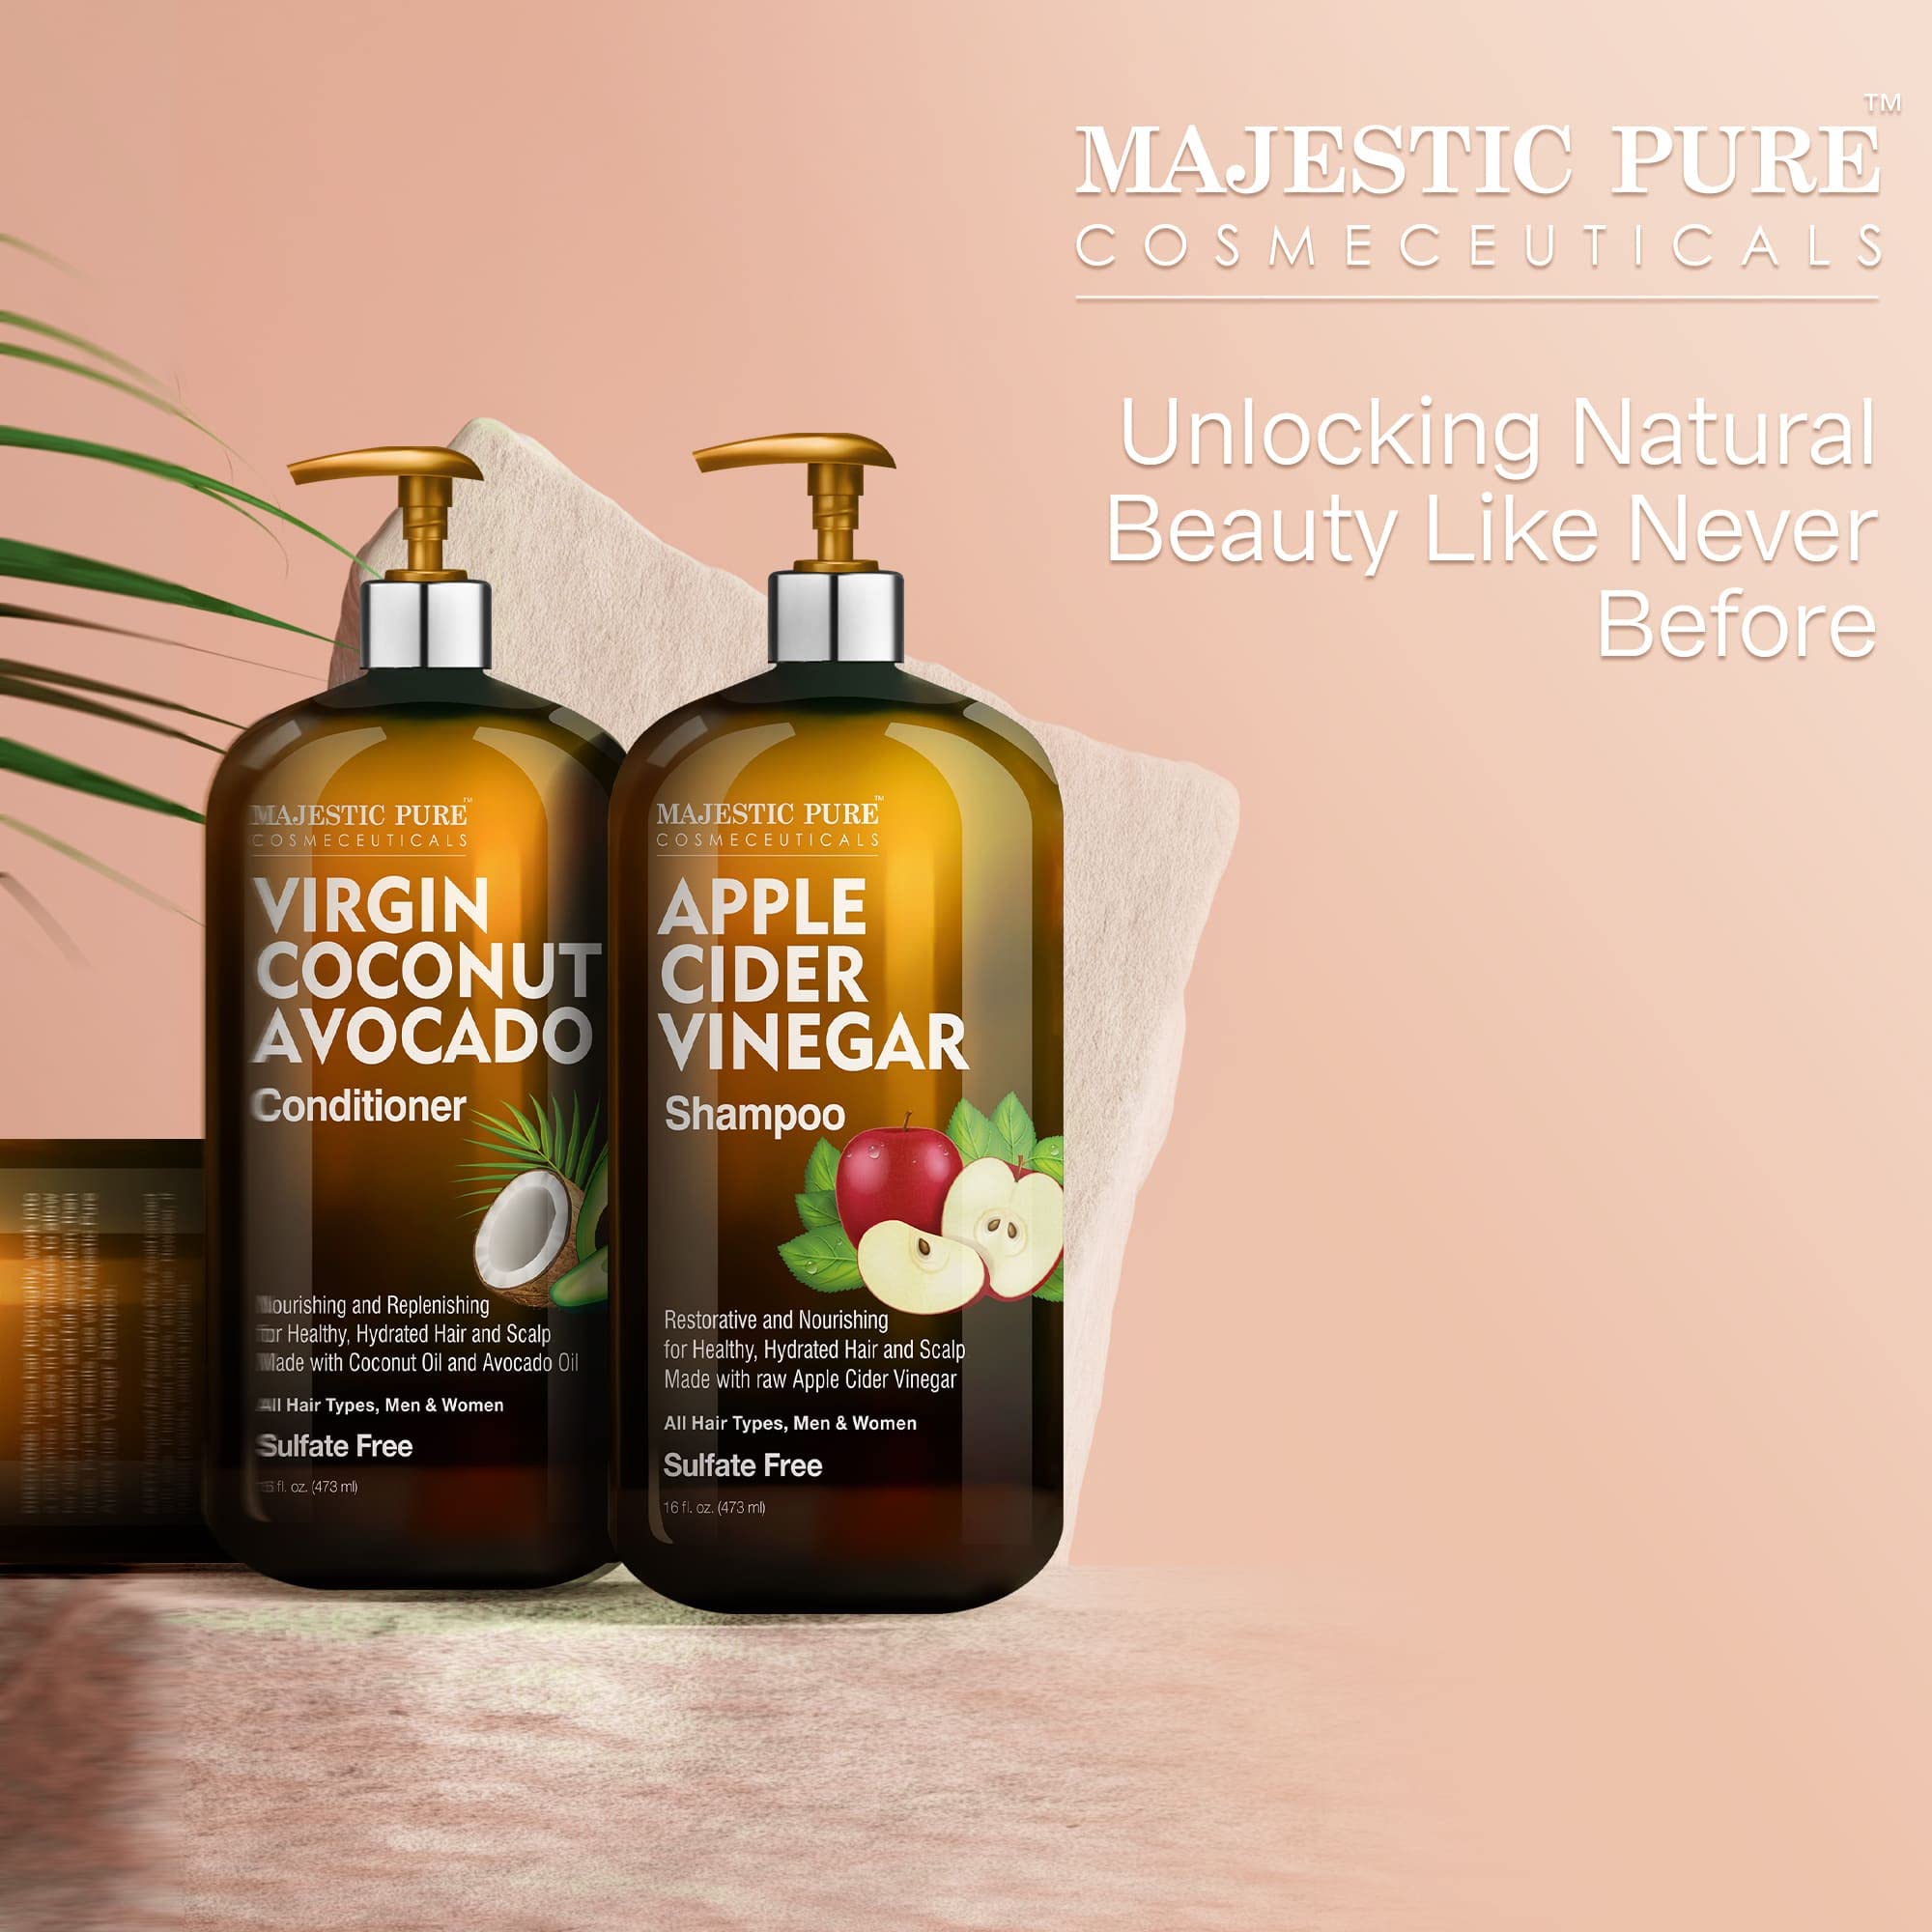 MAJESTIC PURE Apple Cider Vinegar Shampoo and Avocado Coconut Conditioner Set - Restores Shine & Reduces Itchy Scalp, Dandruff & Frizz - Sulfate Free, for All Hair Types, Men and Women - 2 x 16 fl oz